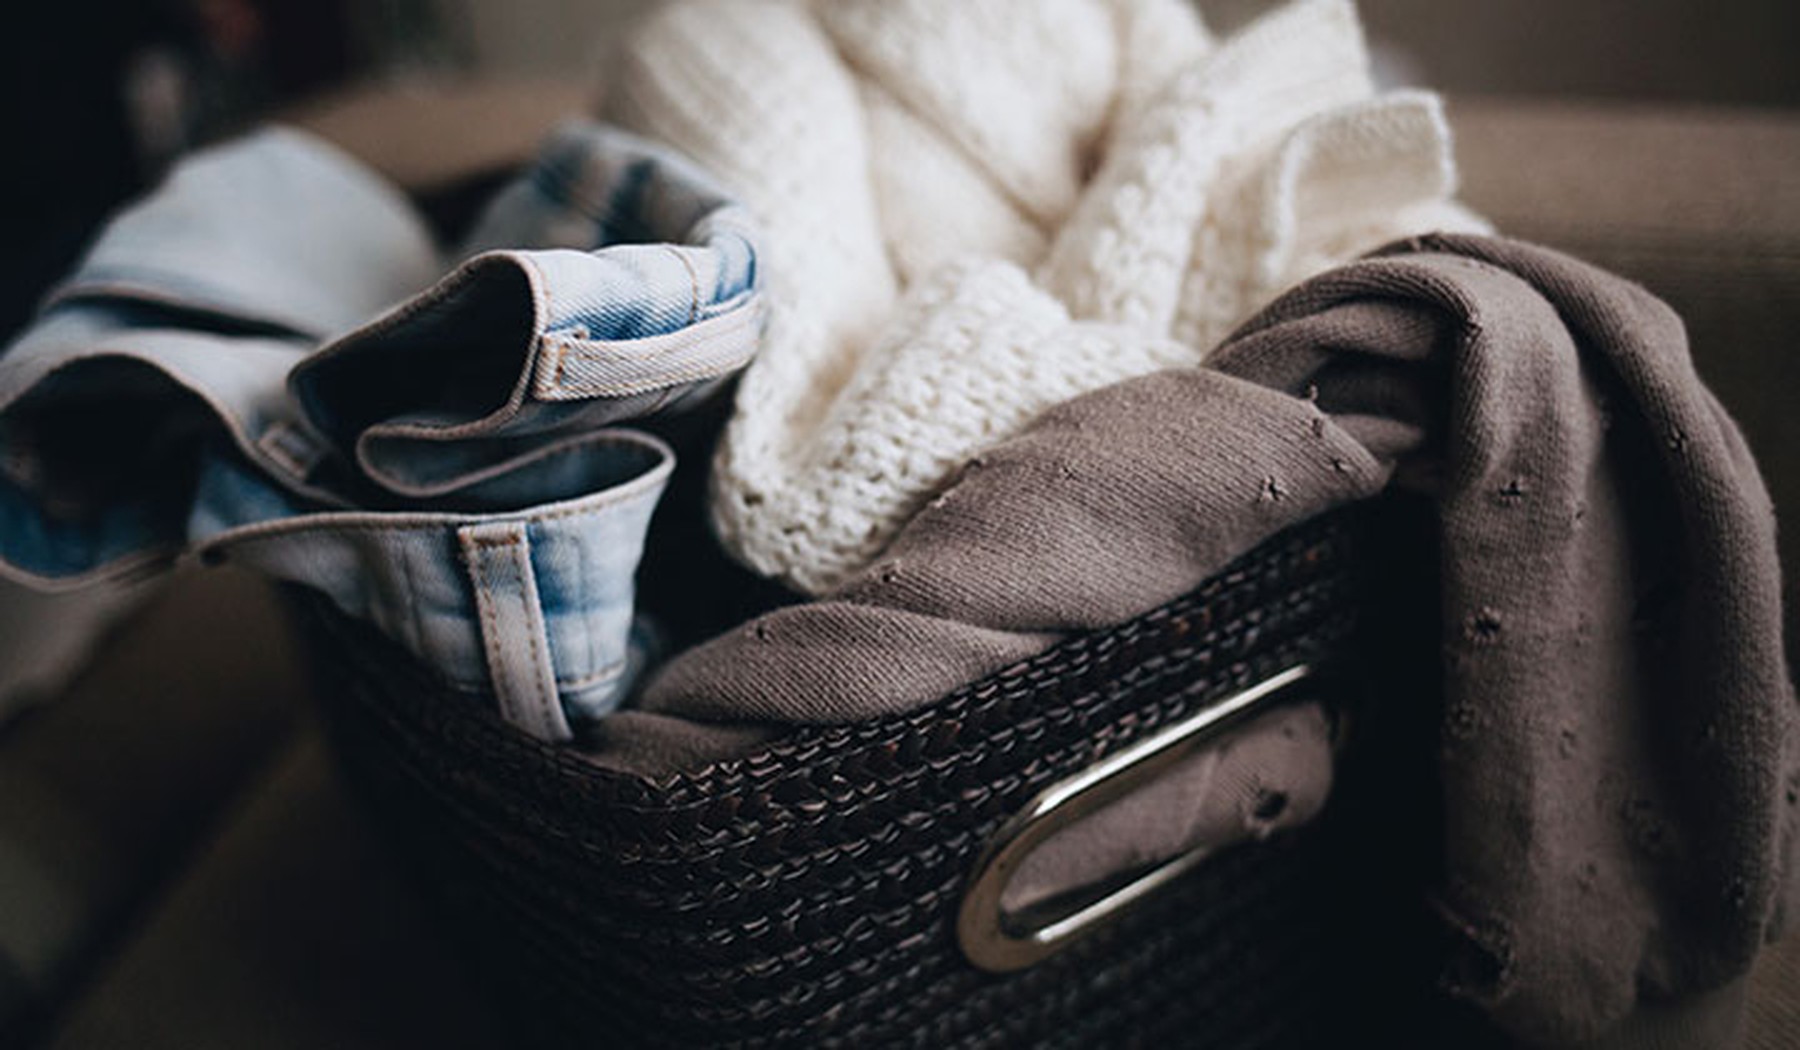 Worn out clothes in a basket